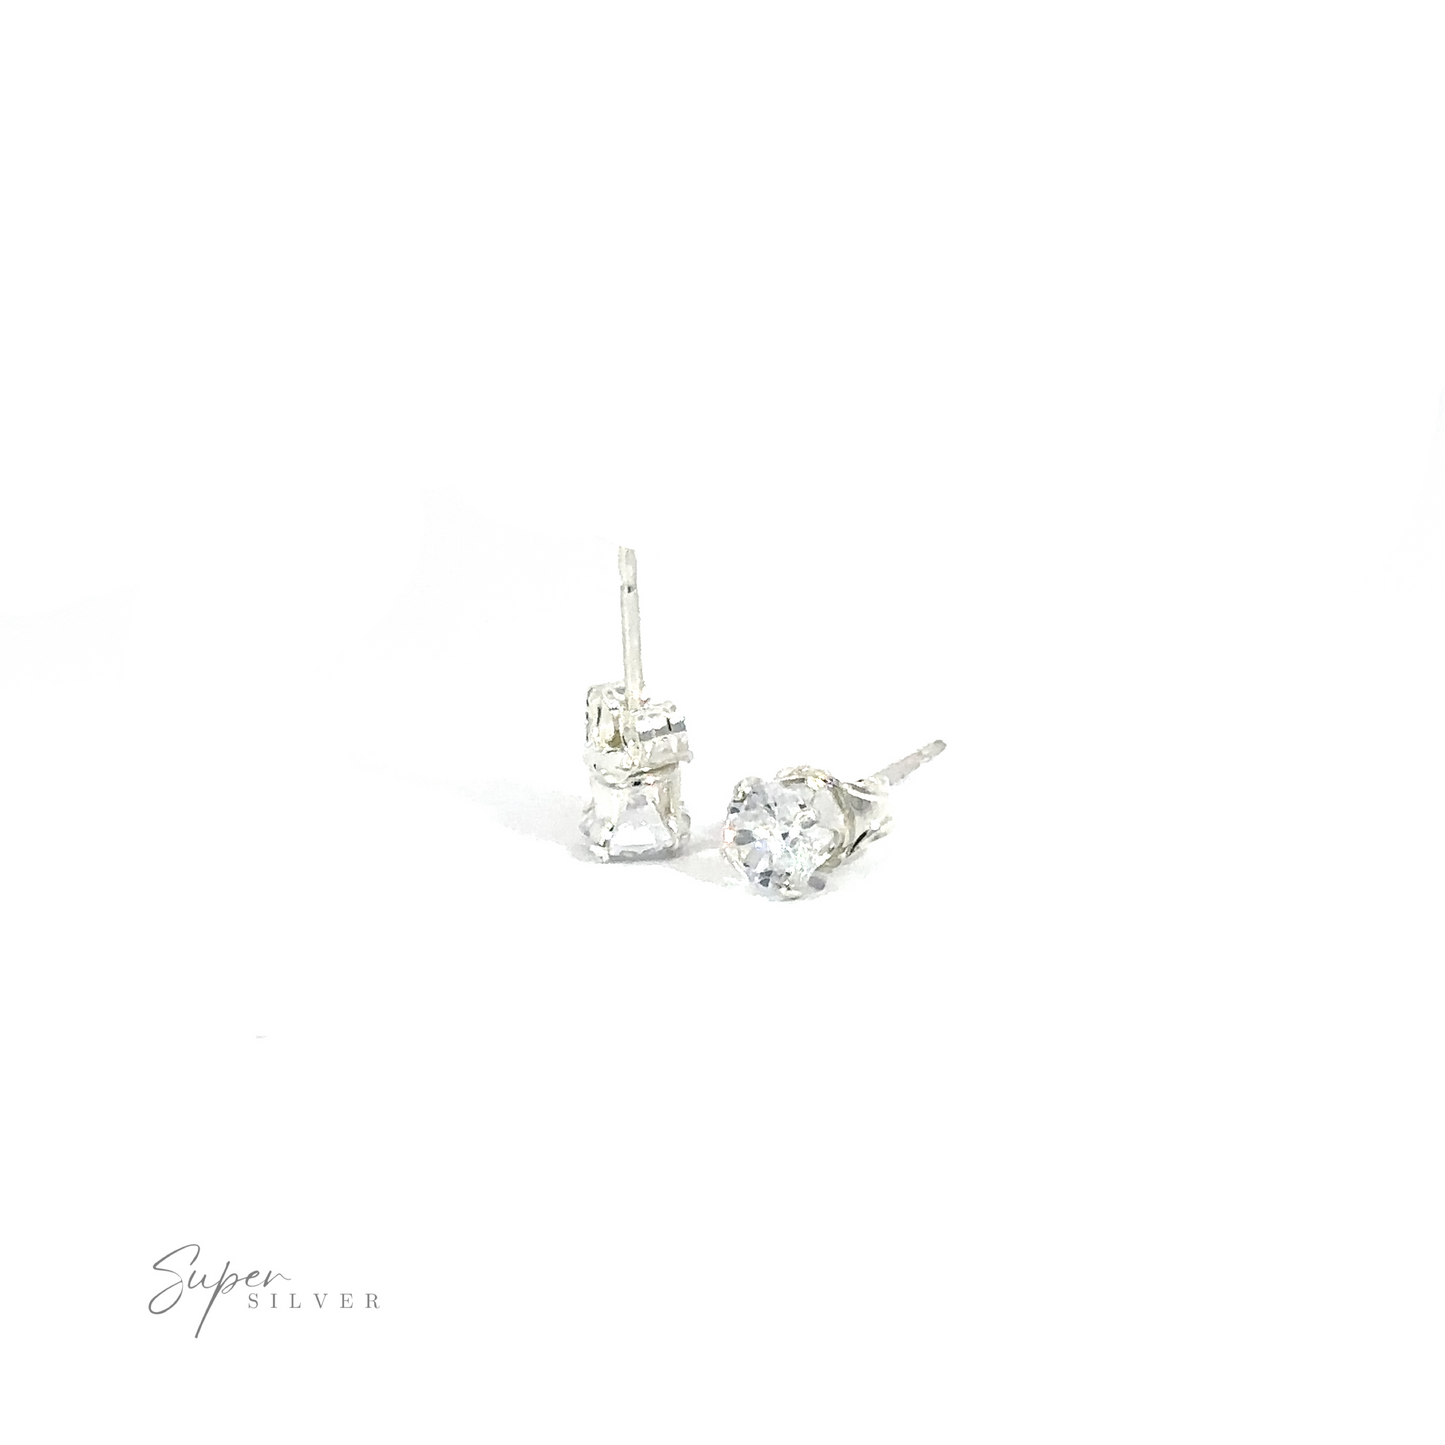 
                  
                    A pair of Round CZ Studs earrings, presented on a white background with a "super silver" signature in the corner.
                  
                